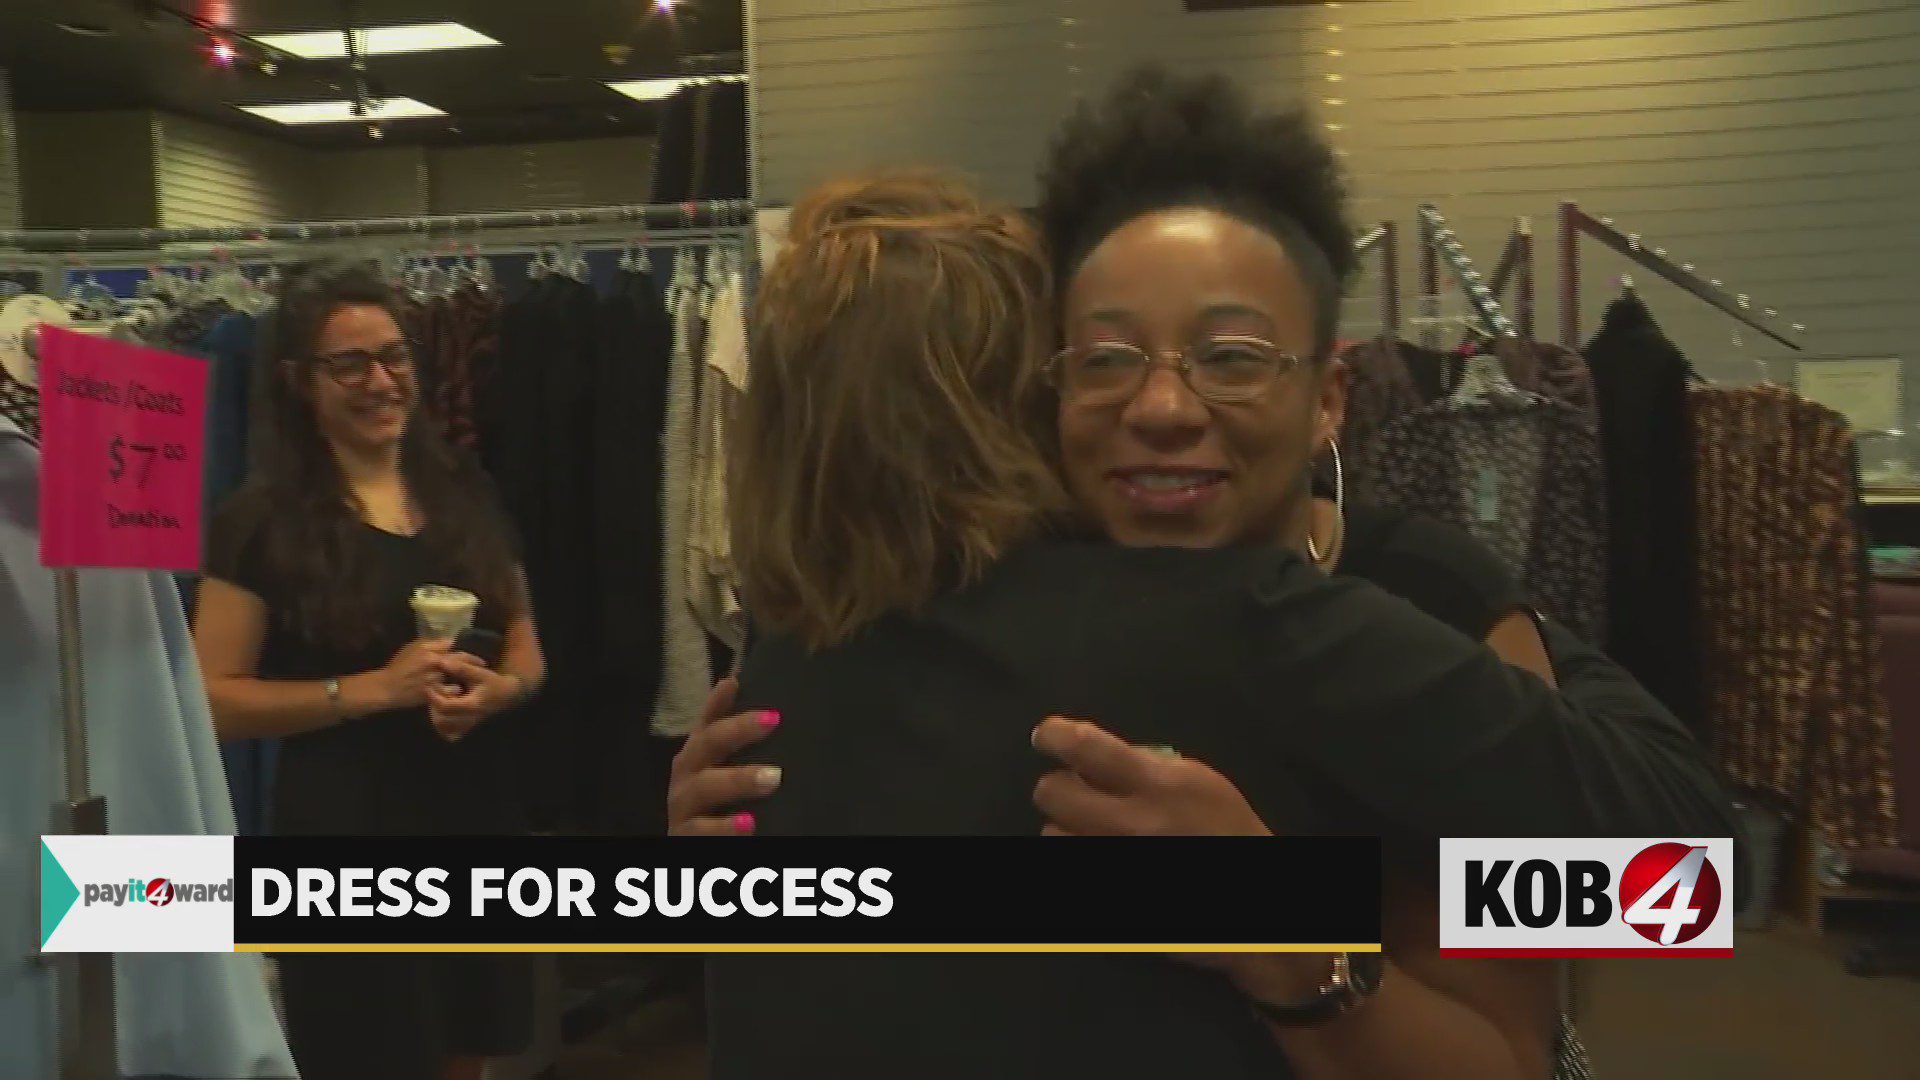 Pay it 4ward: New Mexico woman recognized for helping others ‘Dress for Success’